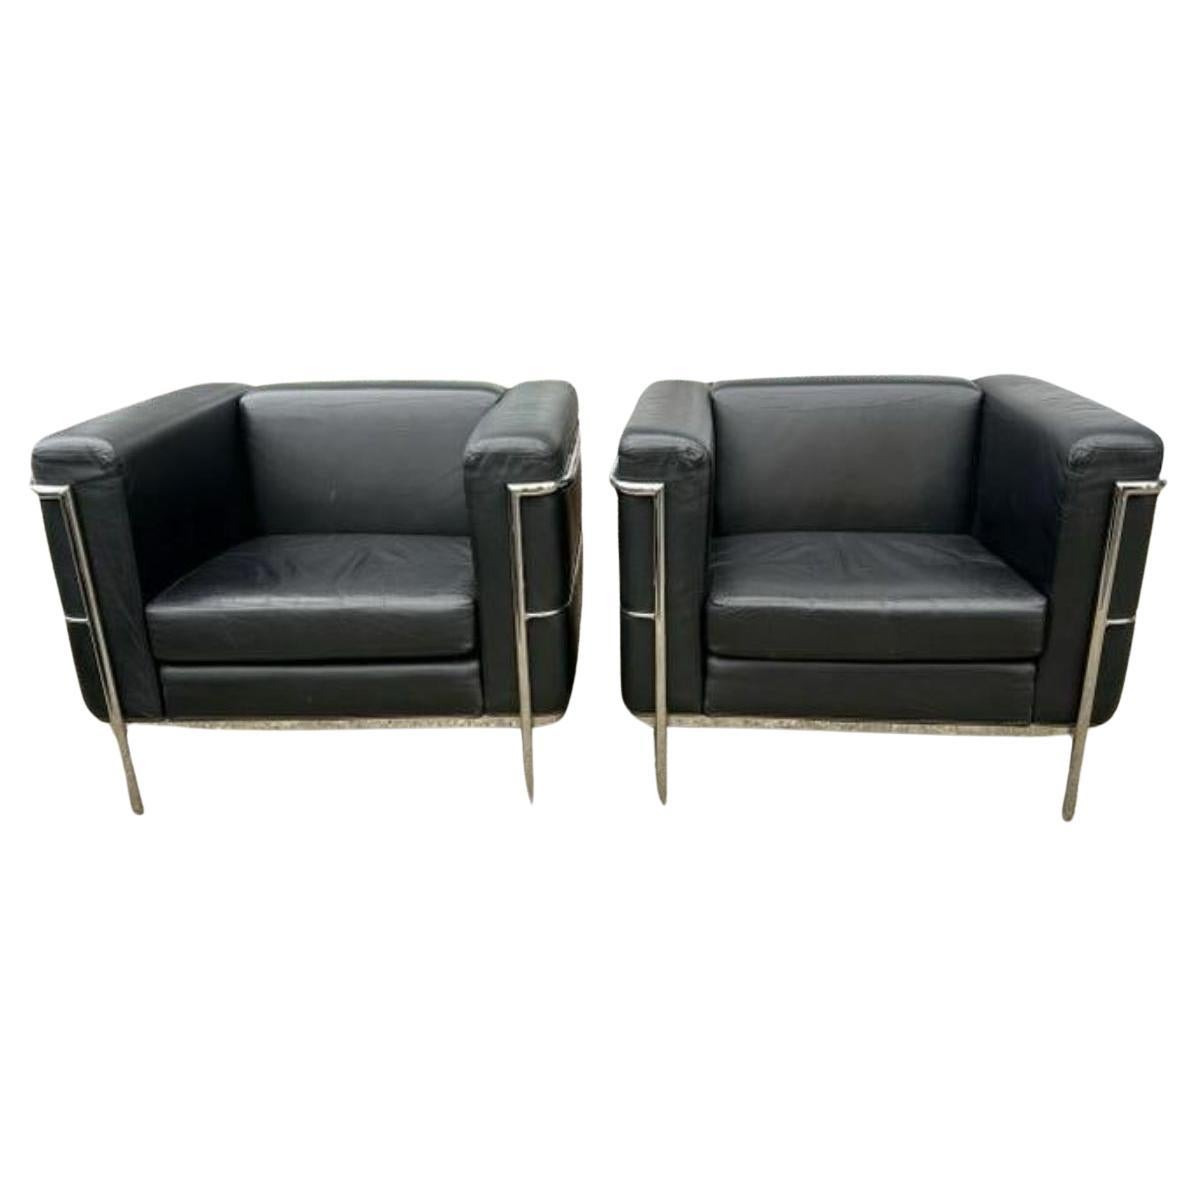 A pair of Vintage lounge or club chairs in the style of Le Corbusier. Wide Model LC3 in Soft Black Leather. Triple chrome plated steel frame. Chairs shows little signs of use very comfortable chrome is in great condition. Manufactured by Jack